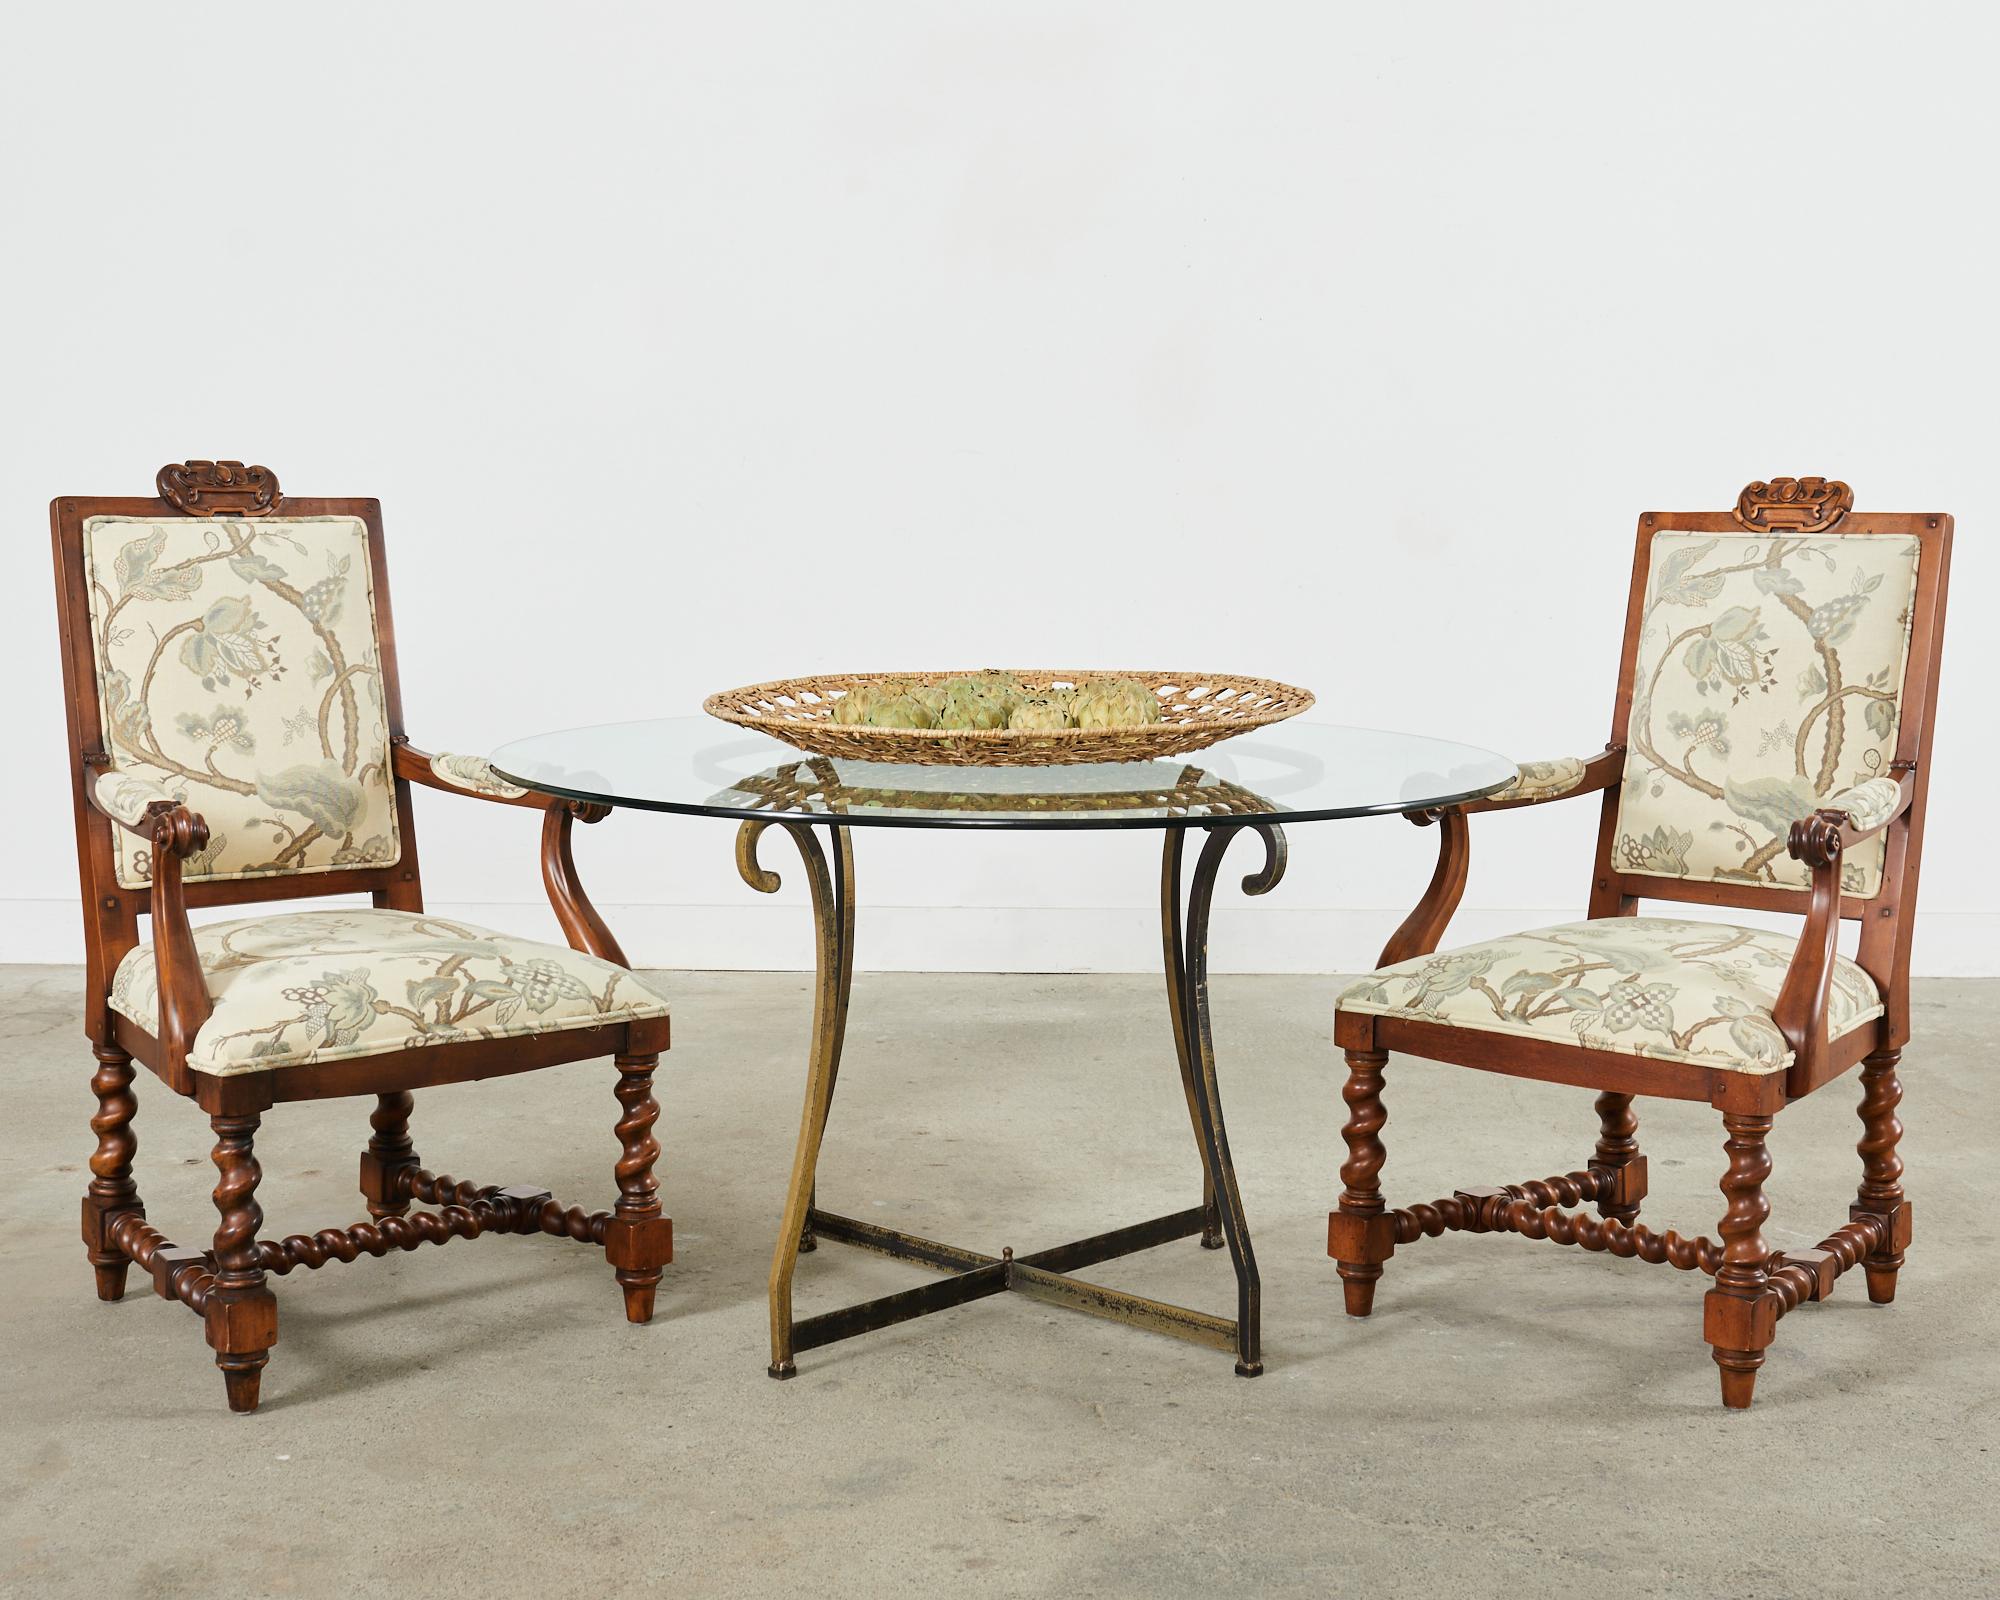 Imposing set of eight baroque style hand-carved dining chairs designed by Ralph Lauren for Henredon. The chairs are crafted from fruitwood and maple. The set consists of six side chairs and two host armchairs measuring 25.5 inches wide. The frames